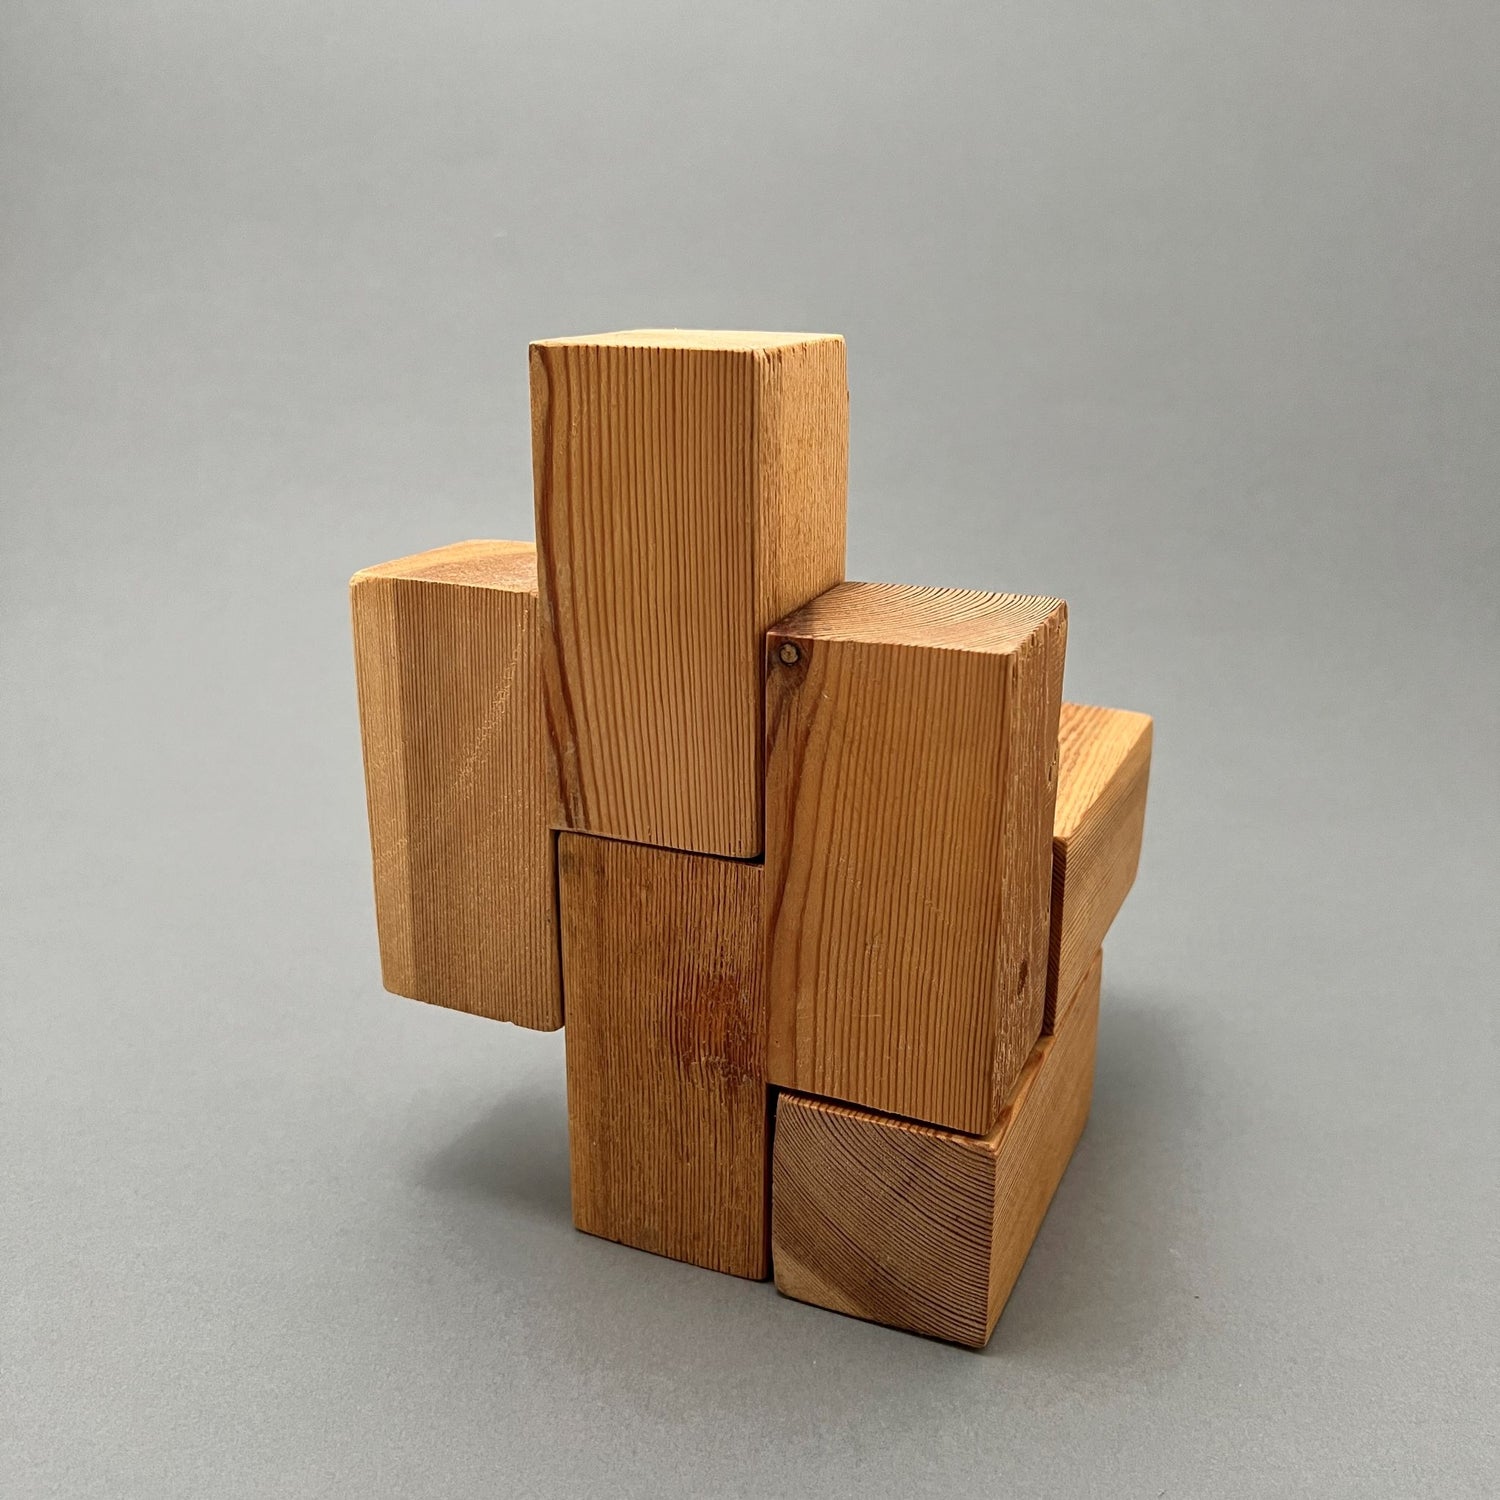 A kinectic sculpture made out of rectangular wooden pieces sitting on a gray background